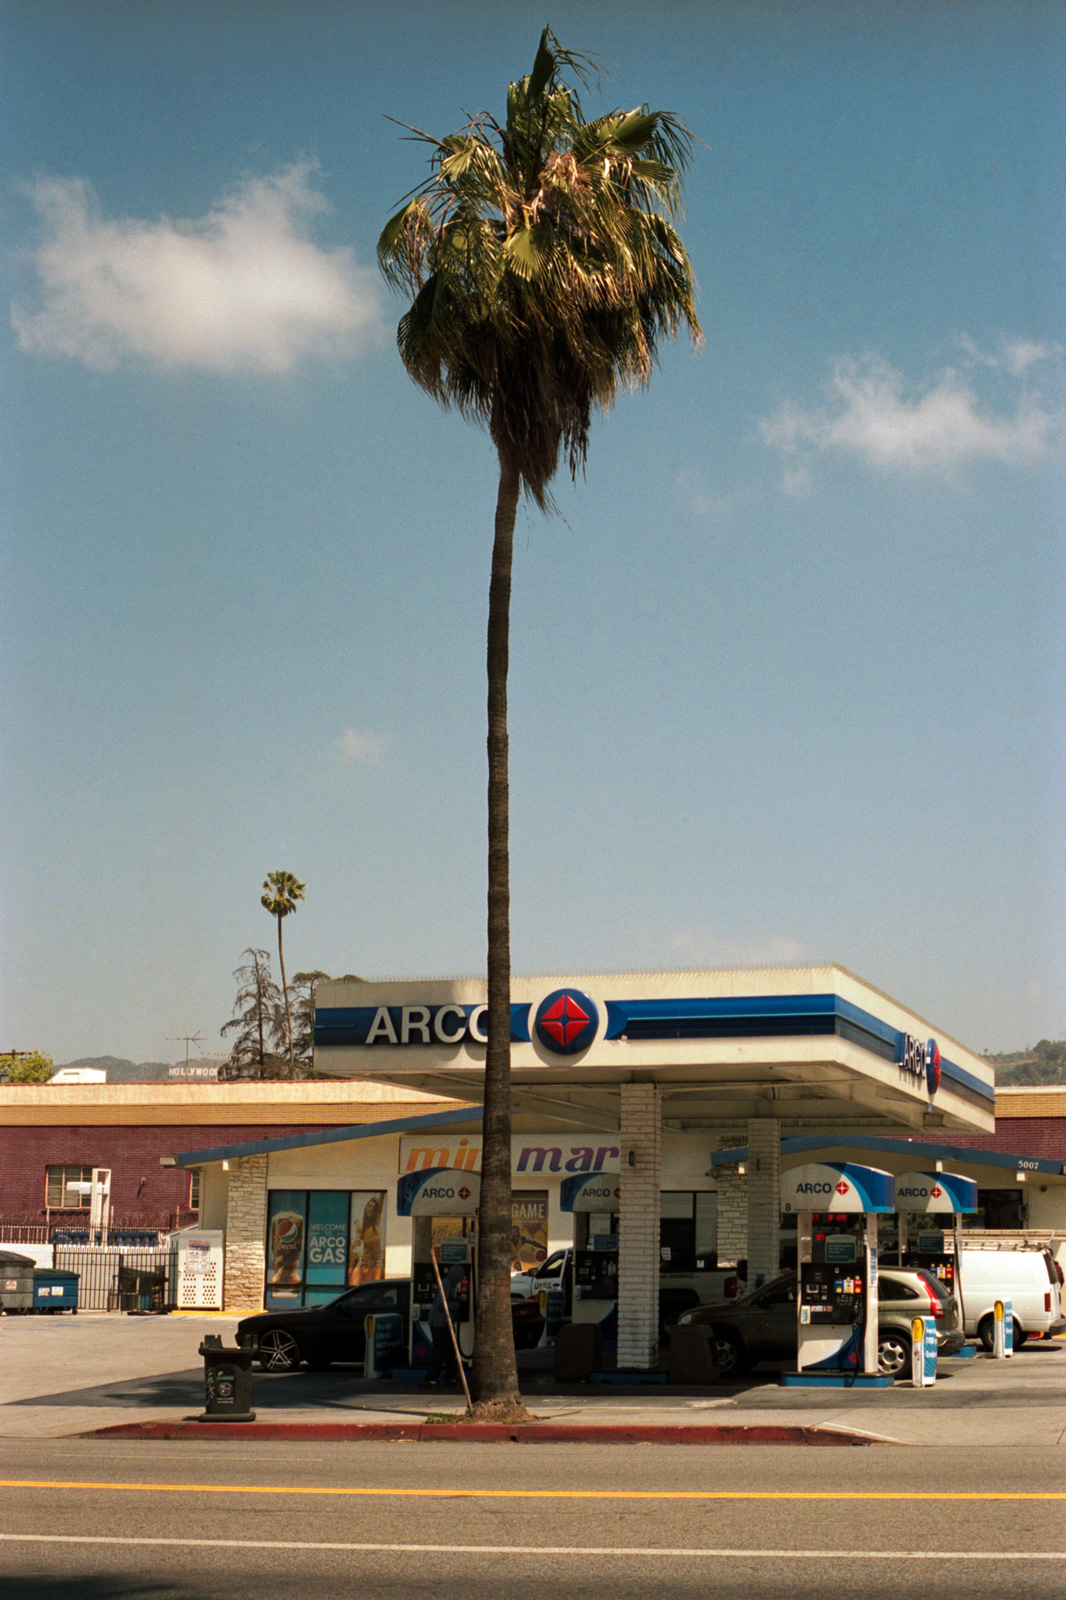 Palm tree infront of Arco gas station, Downtown Los Angeles, street Photography.